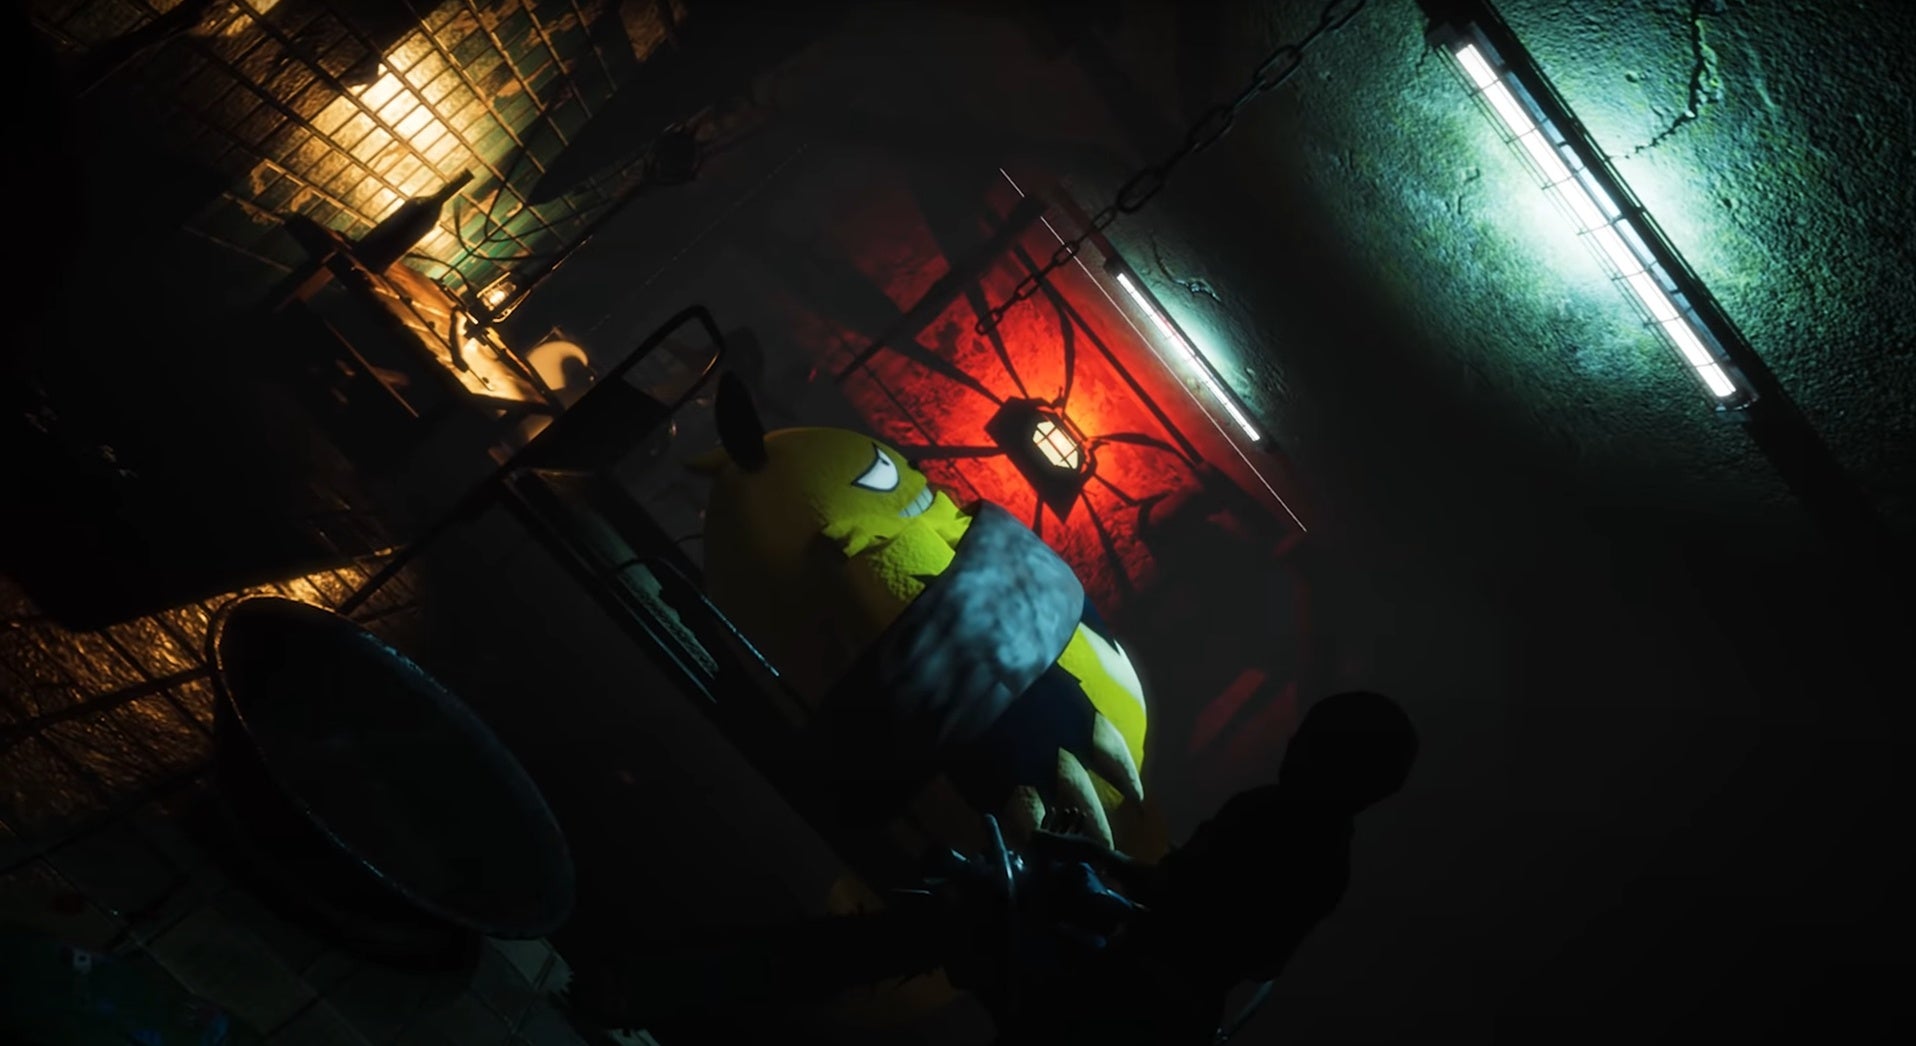 A screenshot of Palworld showing one of its friendly-looking monsters strapped to a bed in a grim, horror-lit room.